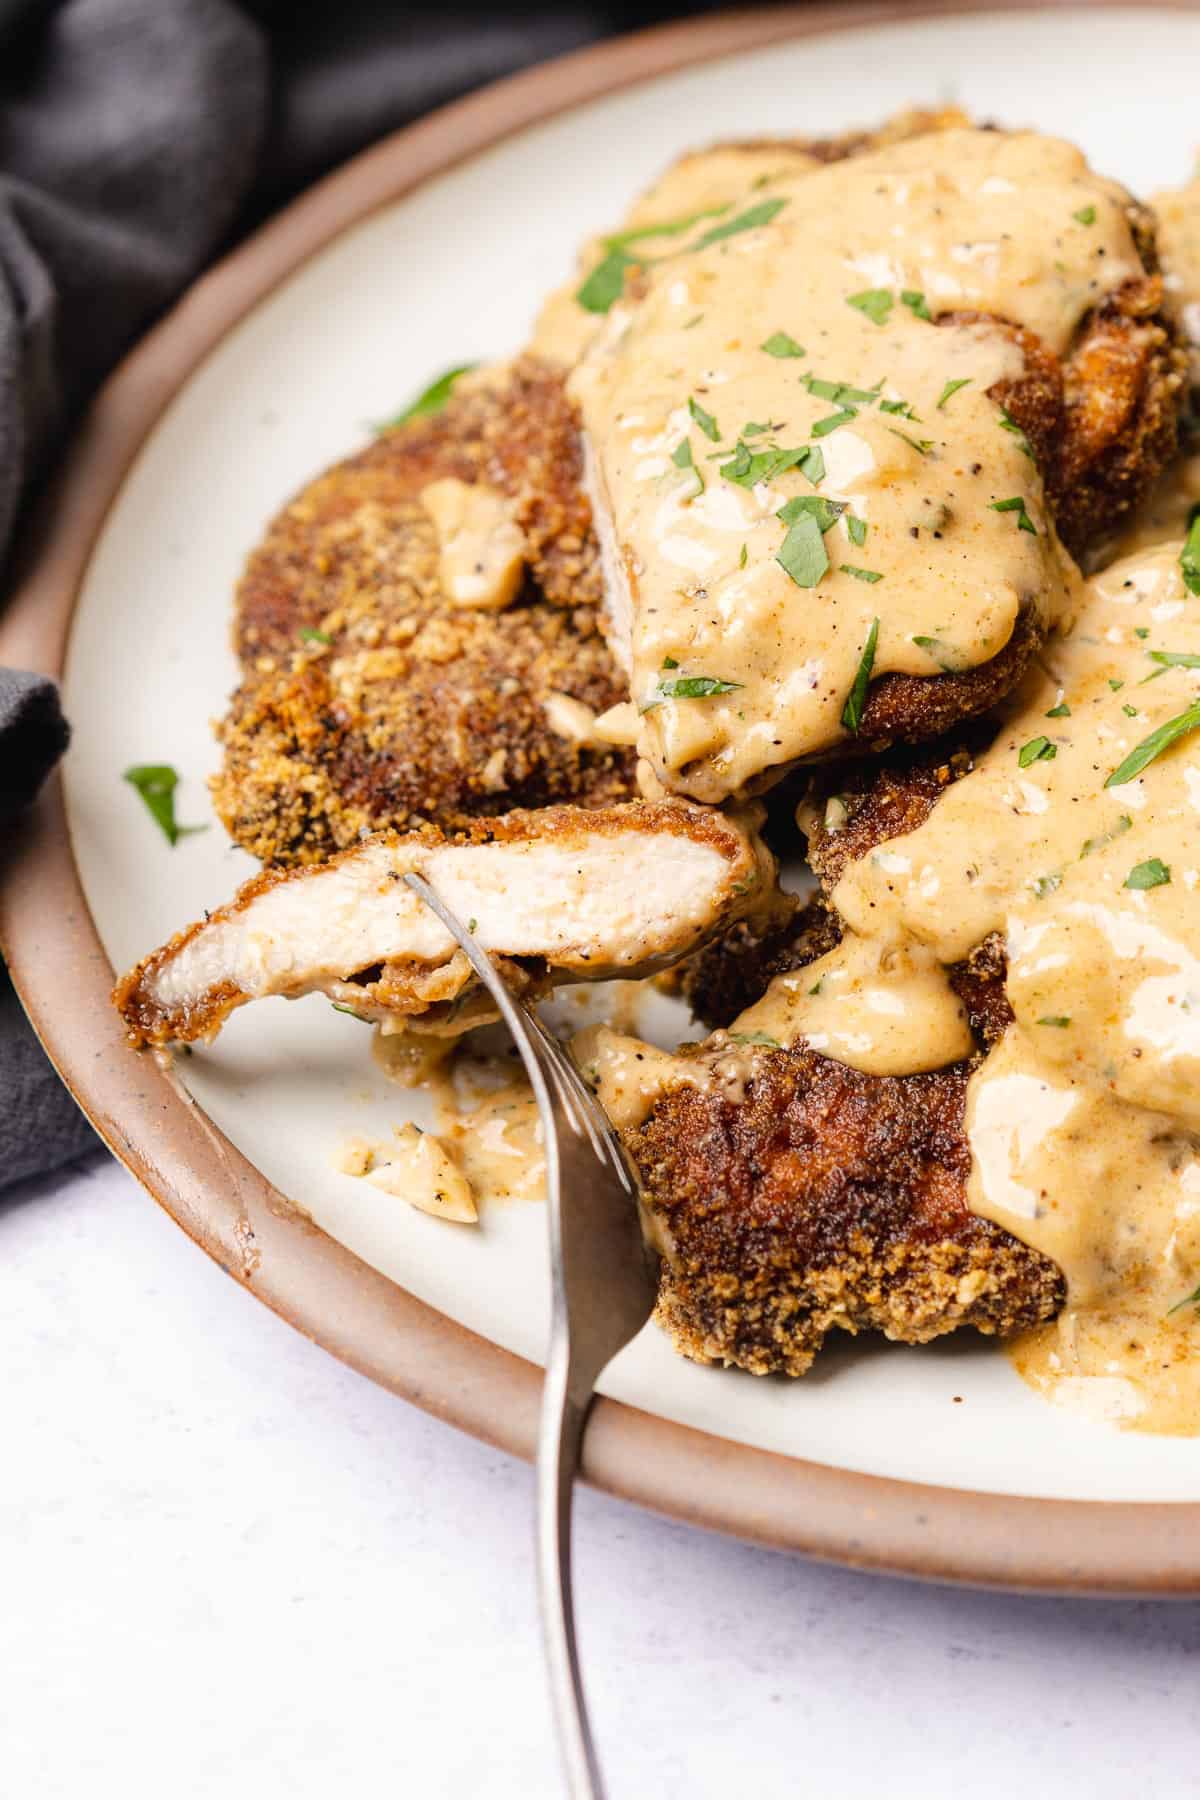 plate of keto fried pork chops smothered in southern gravy with a forkful showing the inside of the pork chop